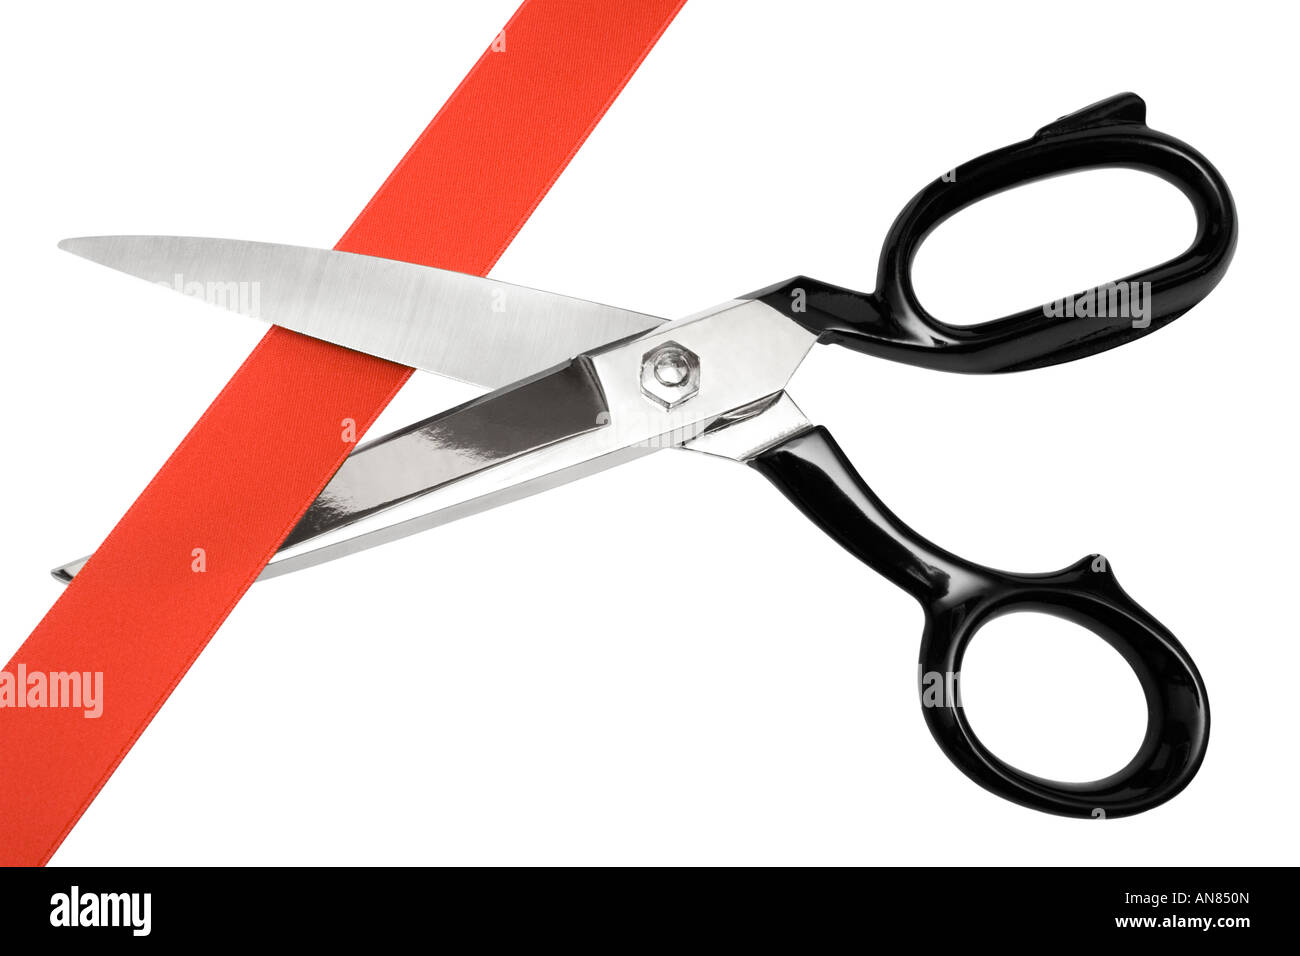 Pair of scissors cutting red ribbon. Isolated on a white background. Stock Photo